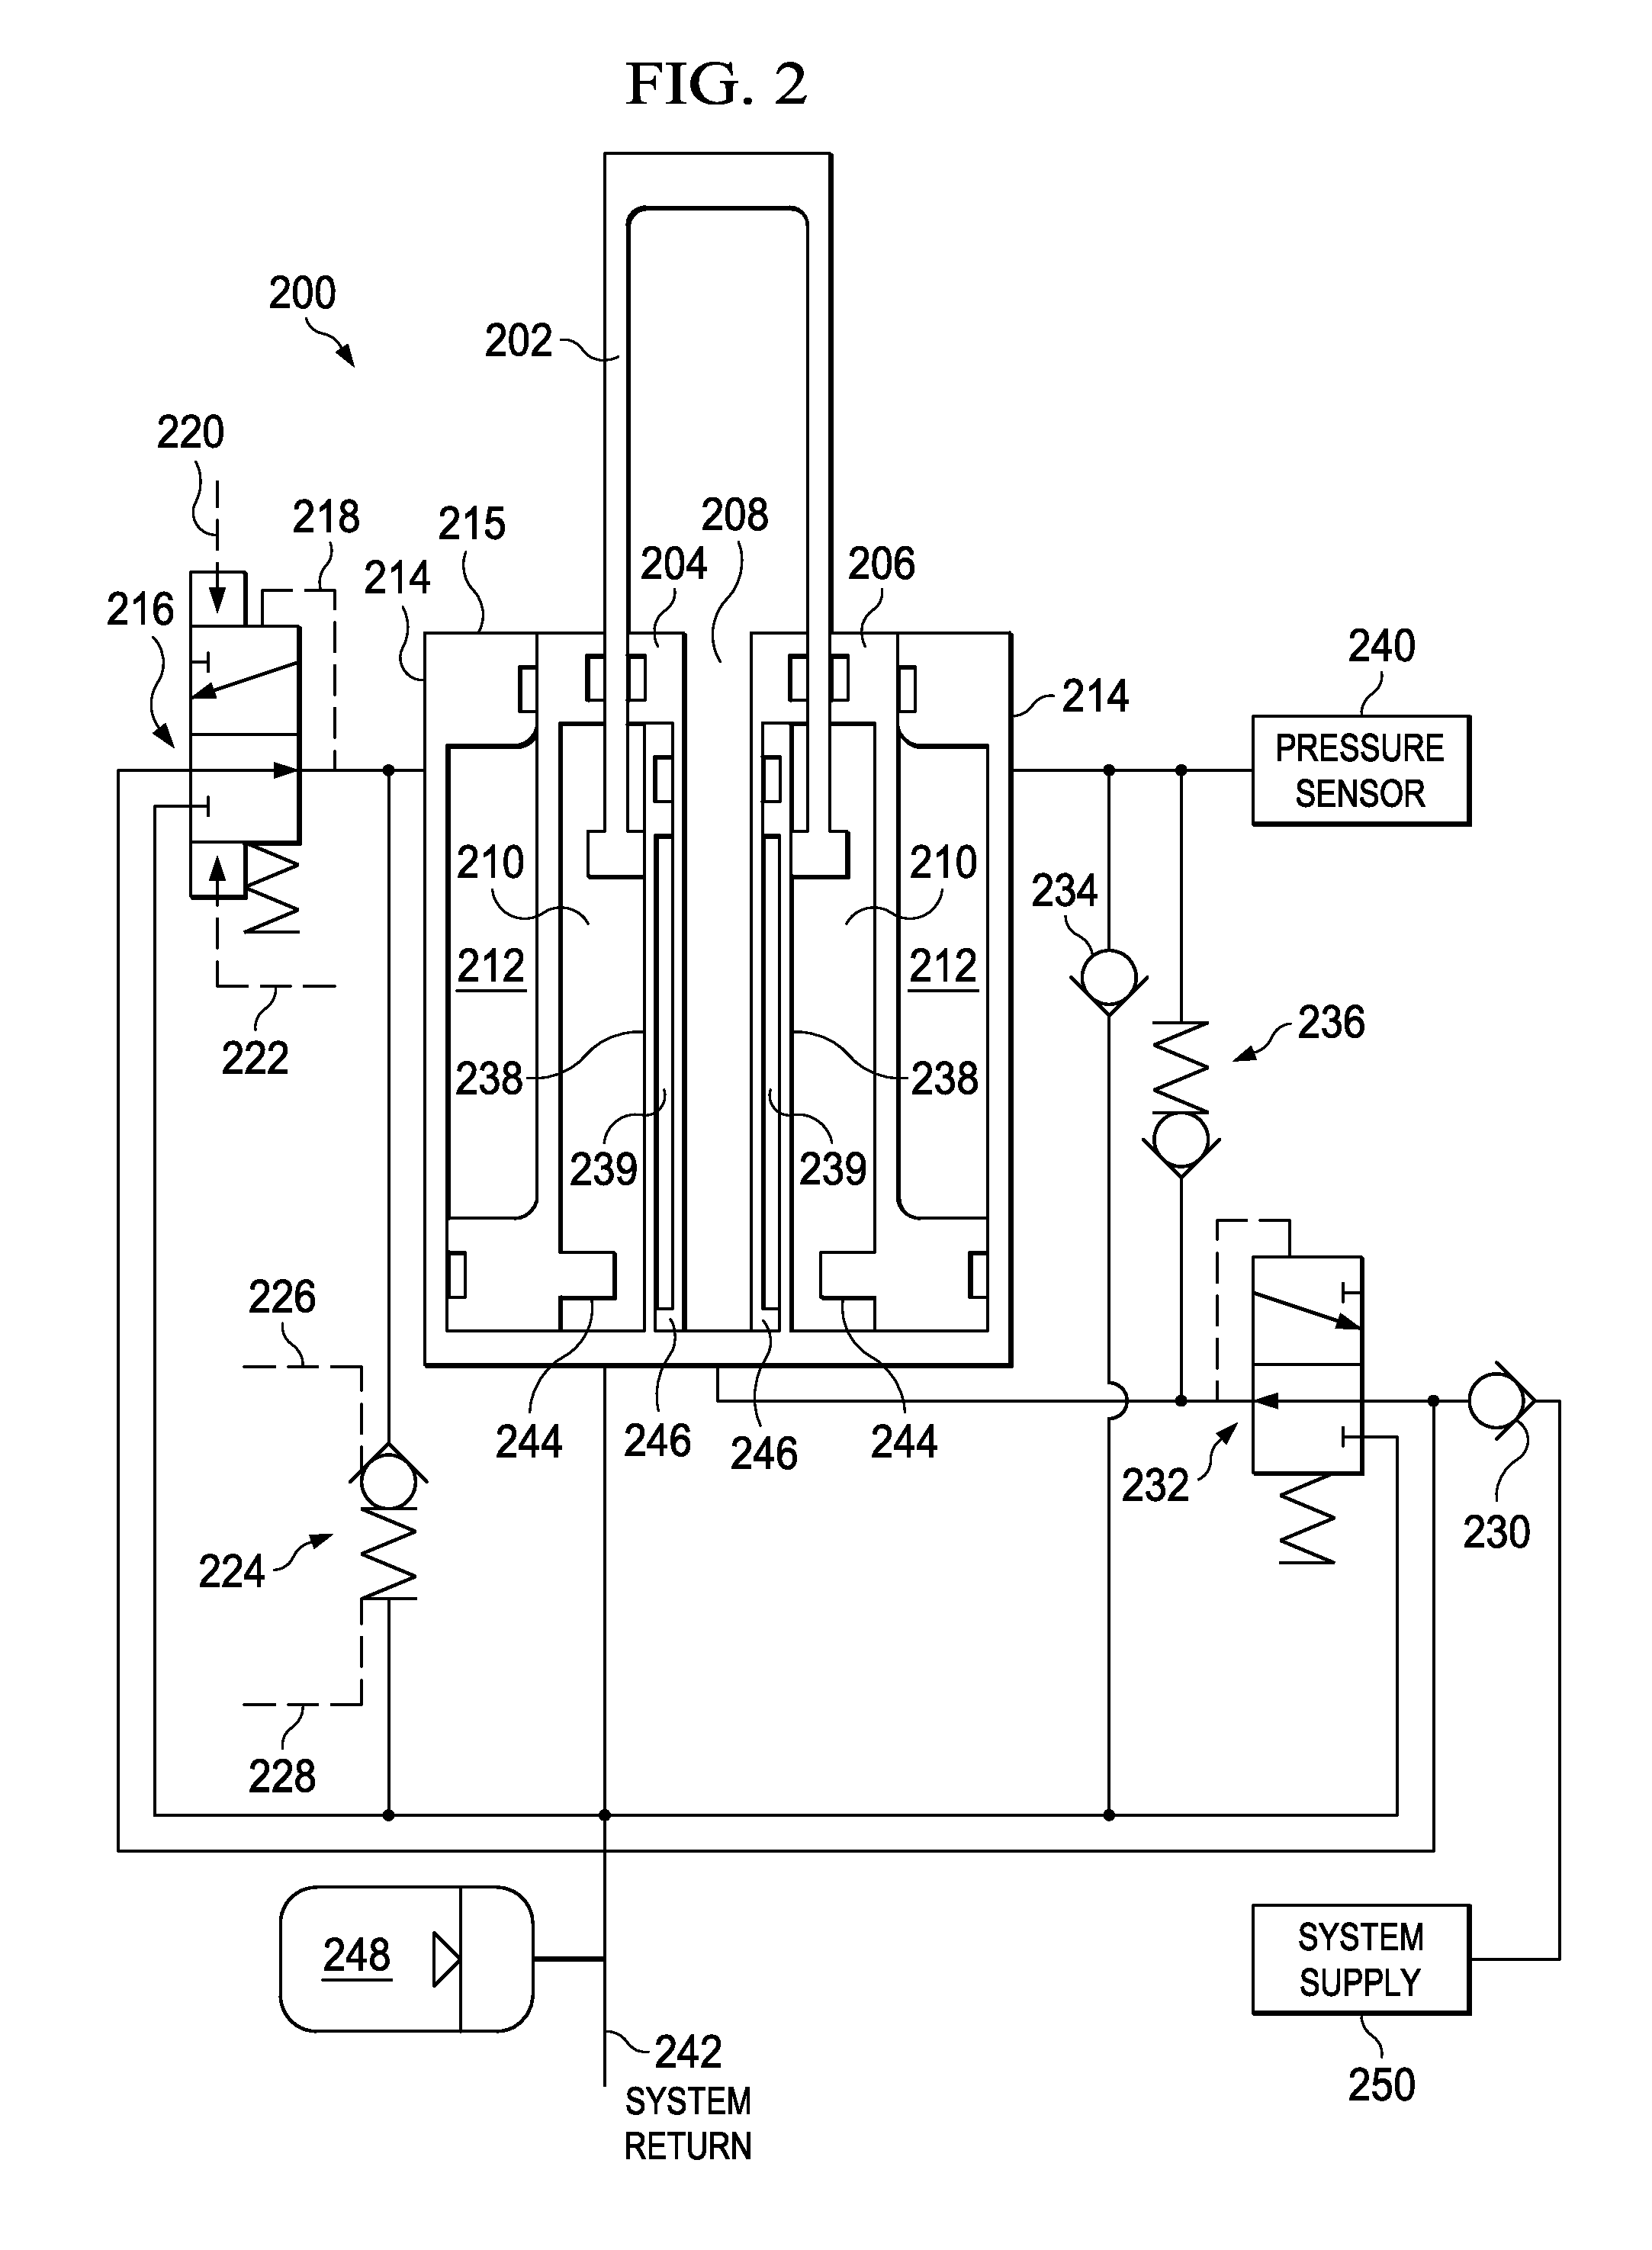 Hydraulic Strut Assembly for Semi-Levered Landing Gear